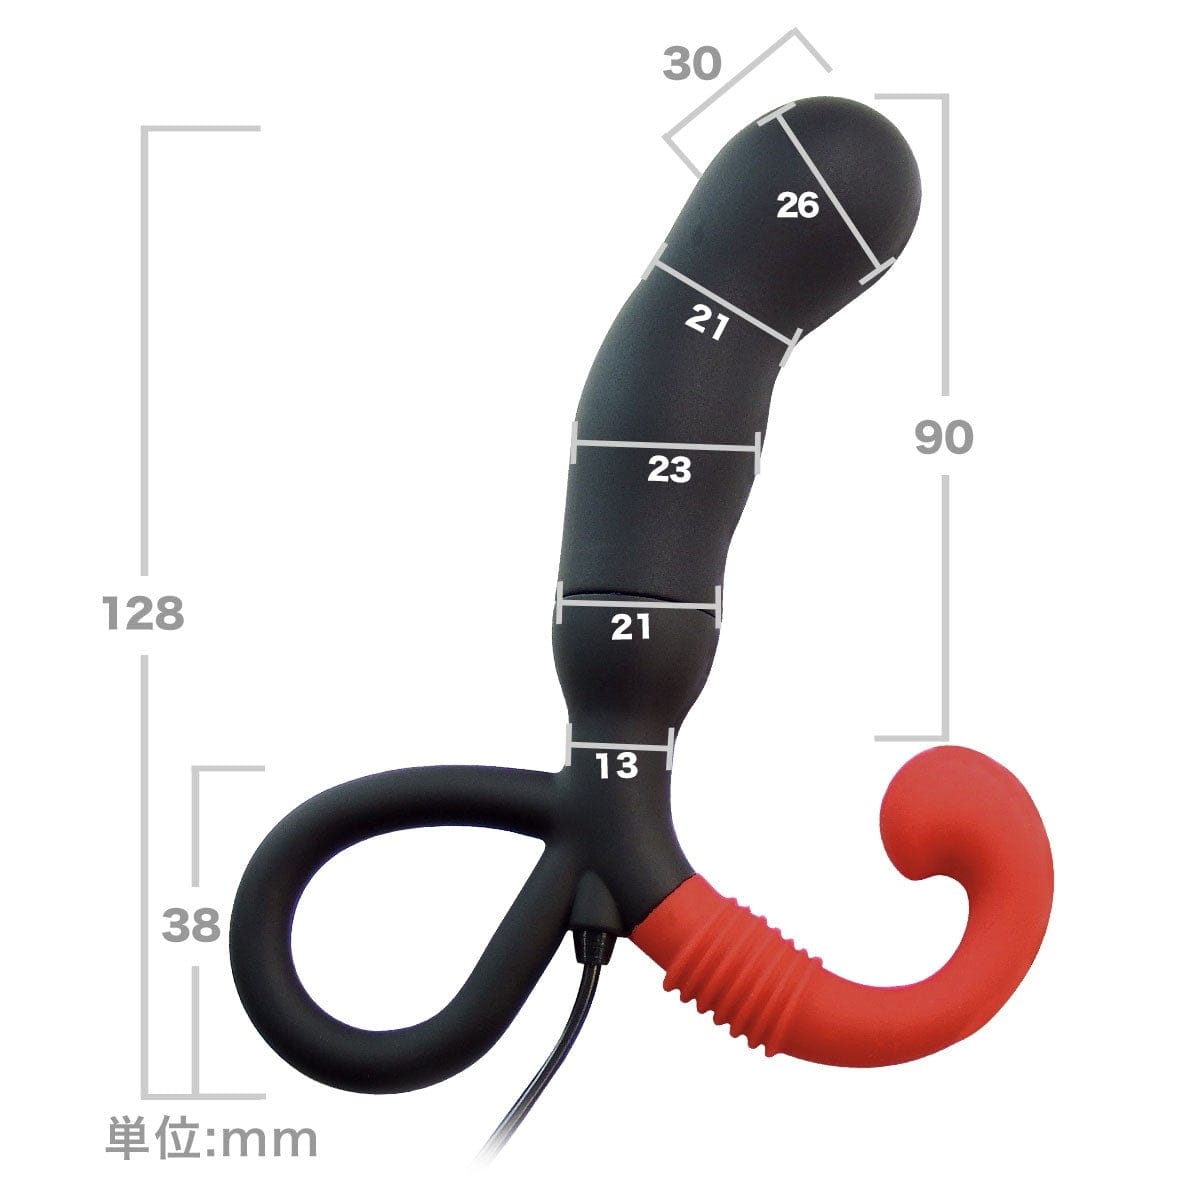 Wild One - Enemable R EX Type δ Delta Remote Control Prostate Massager (Black) -  Remote Control Anal Plug (Vibration) Non Rechargeable  Durio.sg